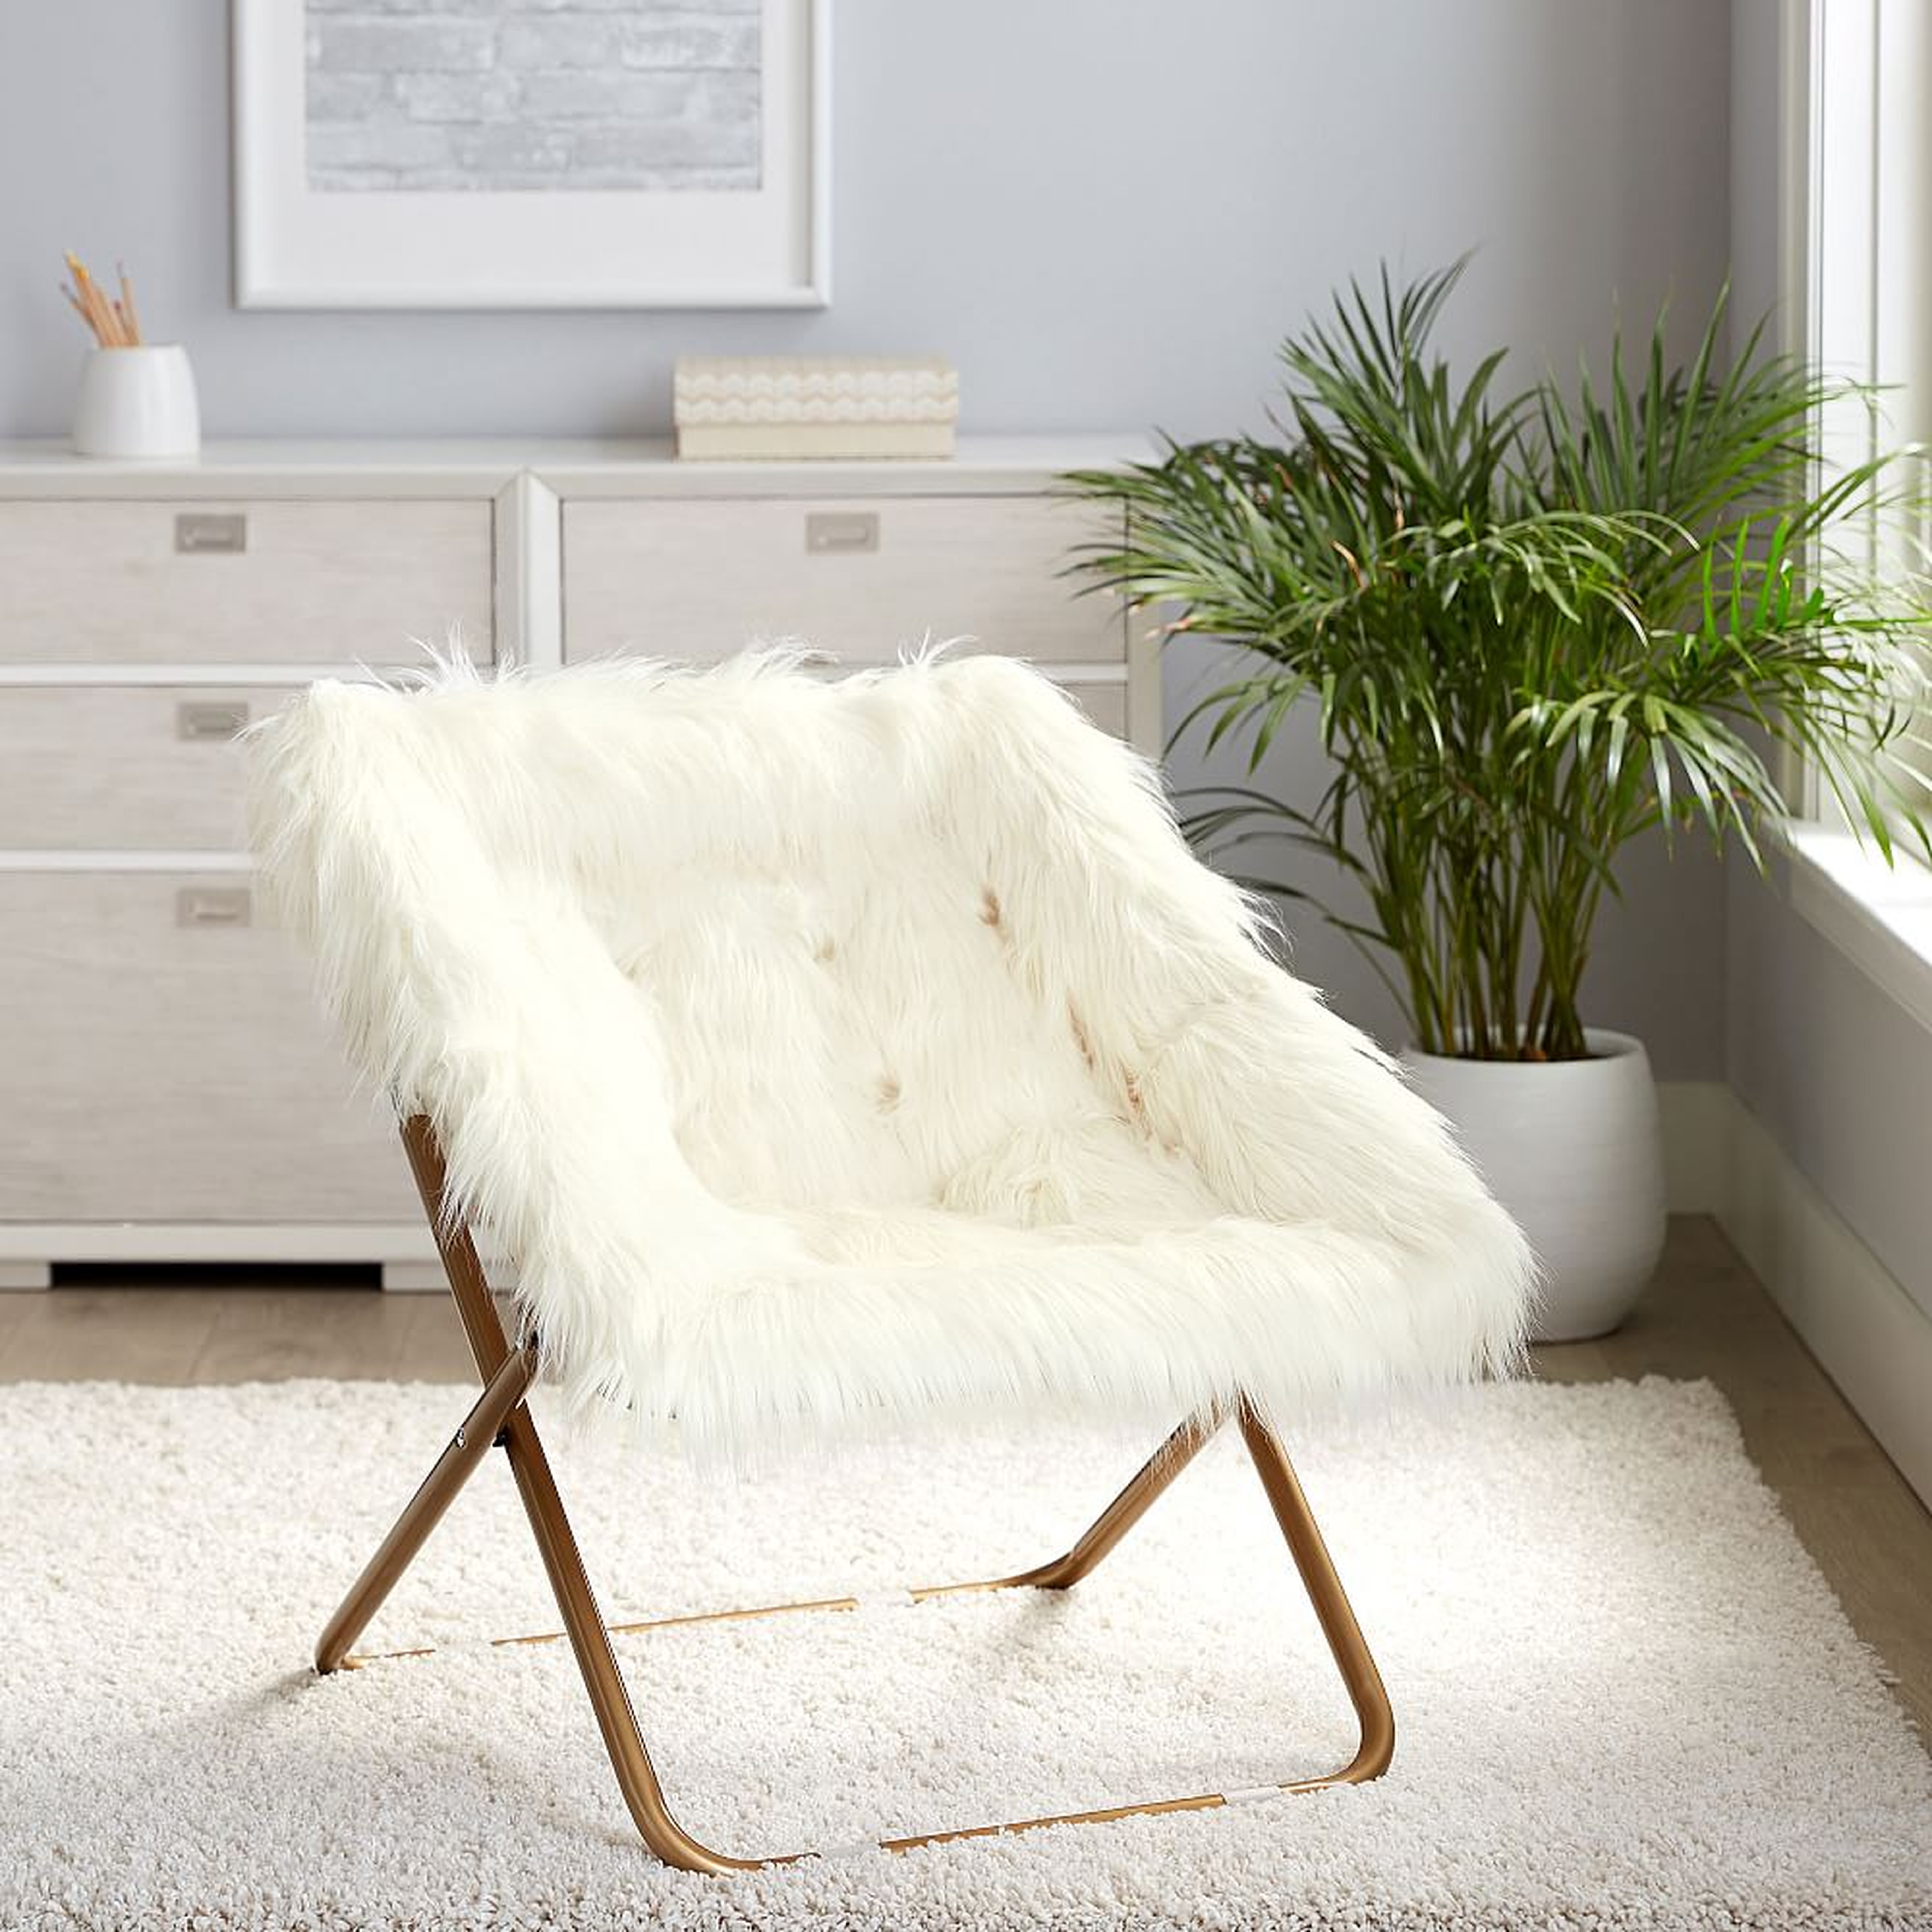 Himalayan Faux-Fur Square Hang-A-Round Chair, Ivory/White - Pottery Barn Teen